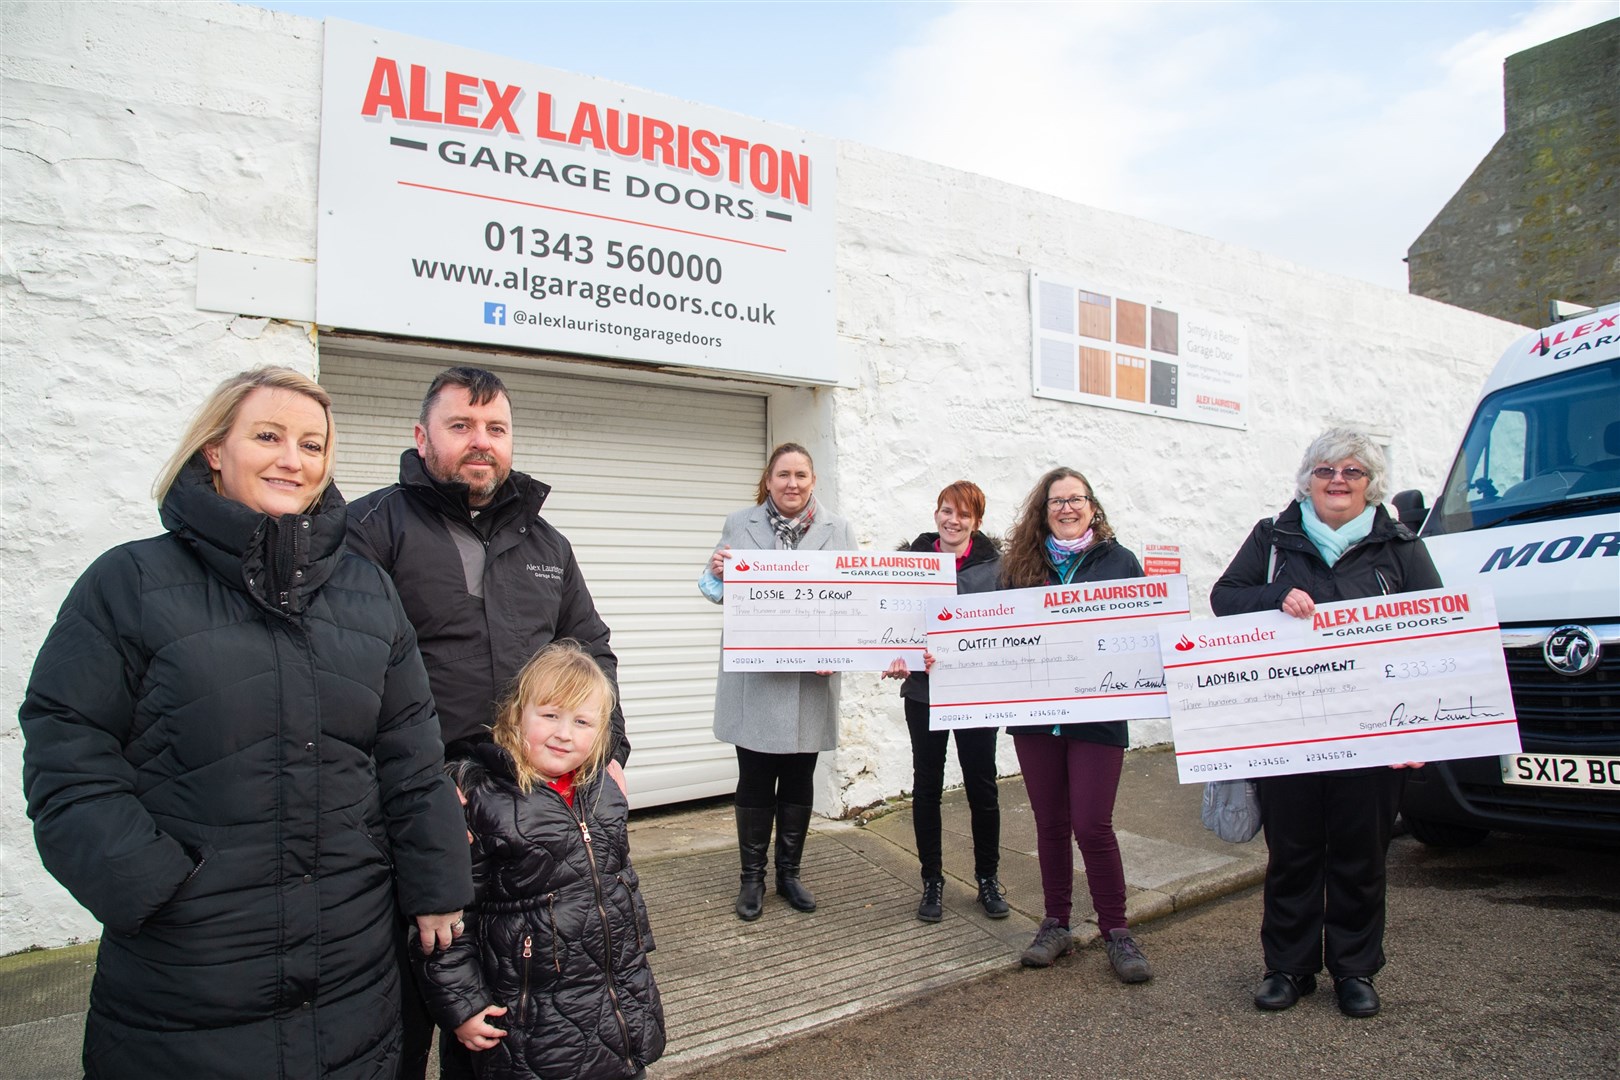 Three local charities in Lossiemouth receive a share of £1000 from Alex Lauriston Garage Doors. From left; Emma, Alex and Sadie Lauriston, Louise McBride and Kirsty Middleton (Lossiemouth 2-3 Group), Karen Cox (Outfit Moray) and Ann Ingram (The Ladybird Group). Picture: Daniel Forsyth